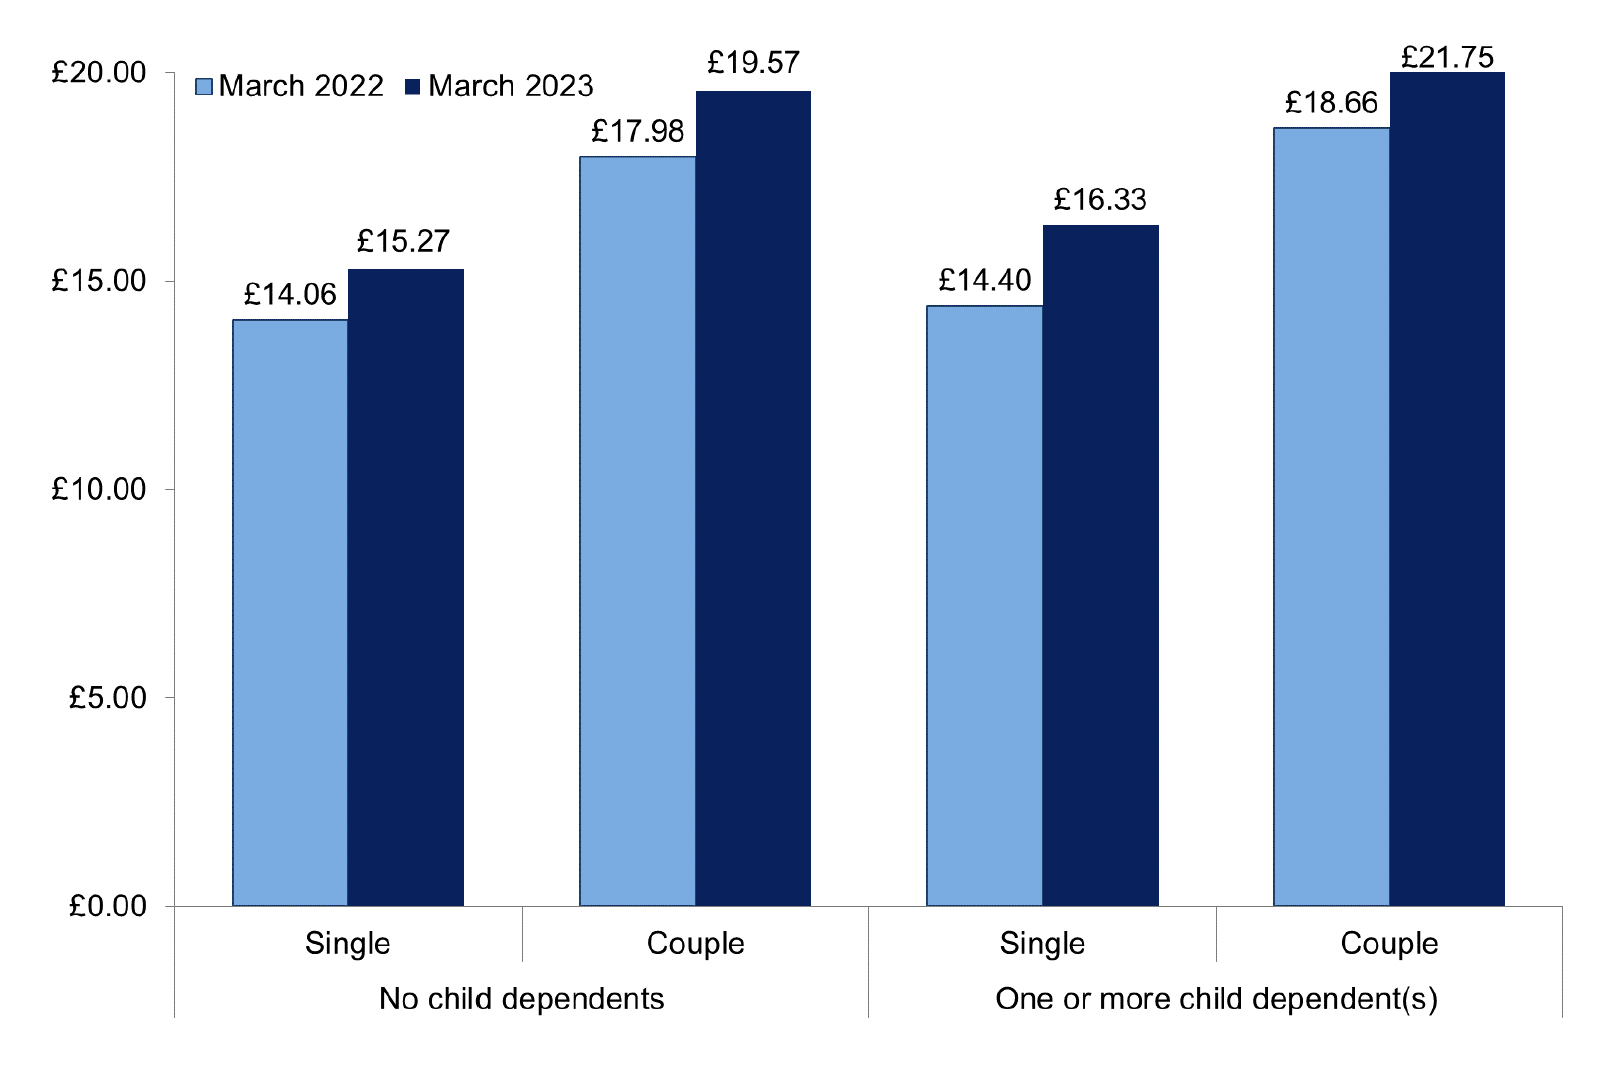 Bar chart comparing average weekly award by family status, March 2022 and March 2023